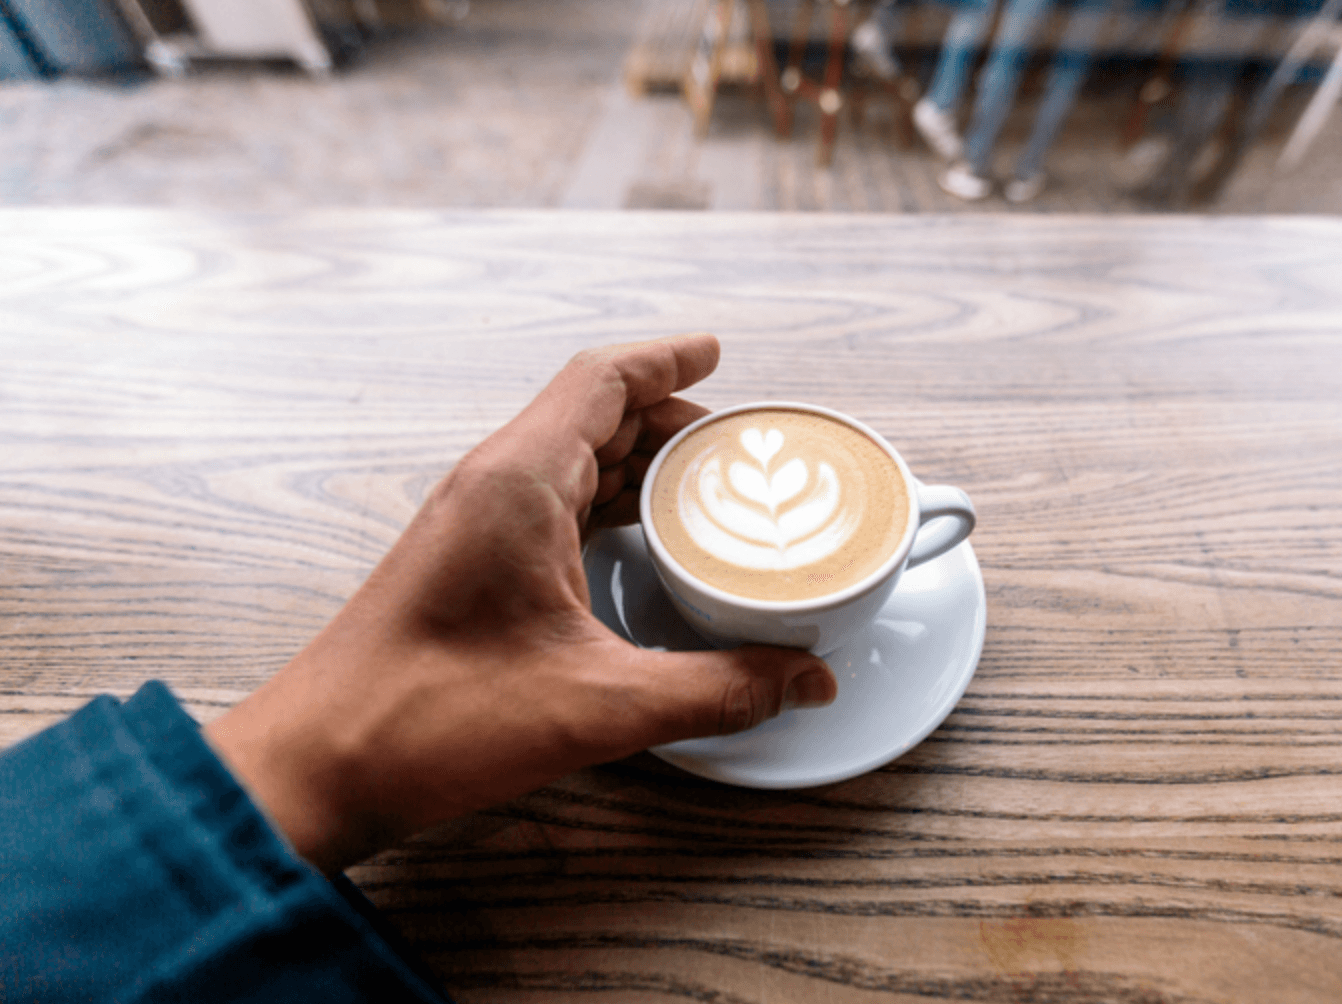 Mushroom Coffee: What Is It and Should You Be Drinking It? - No Ordinary Moments